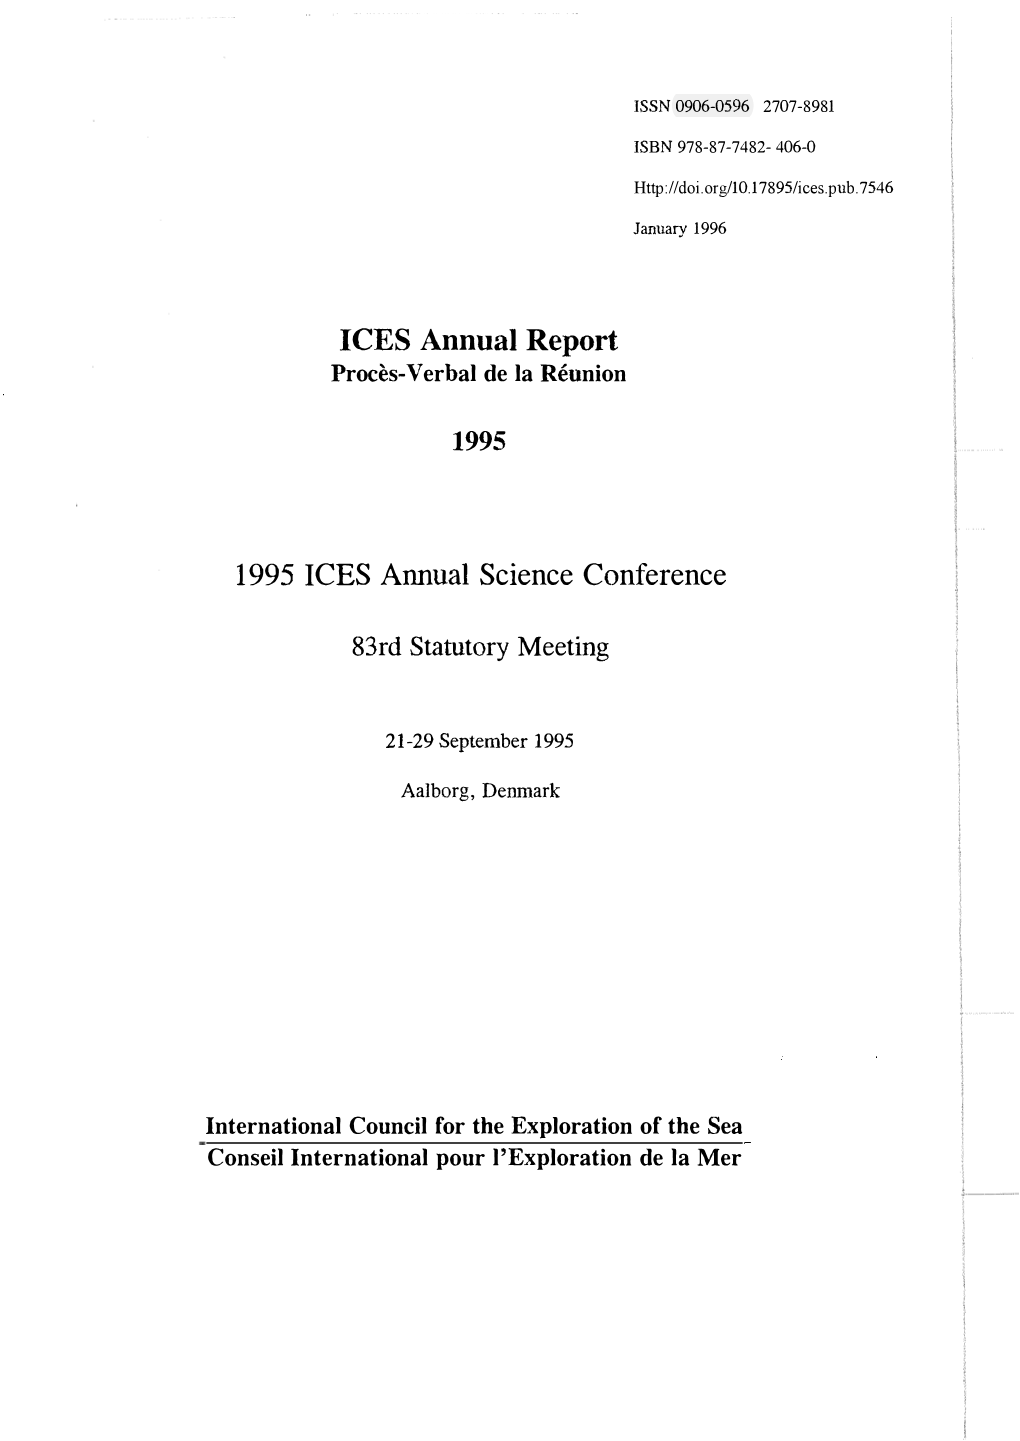 1995 ICES Annual Science Conference